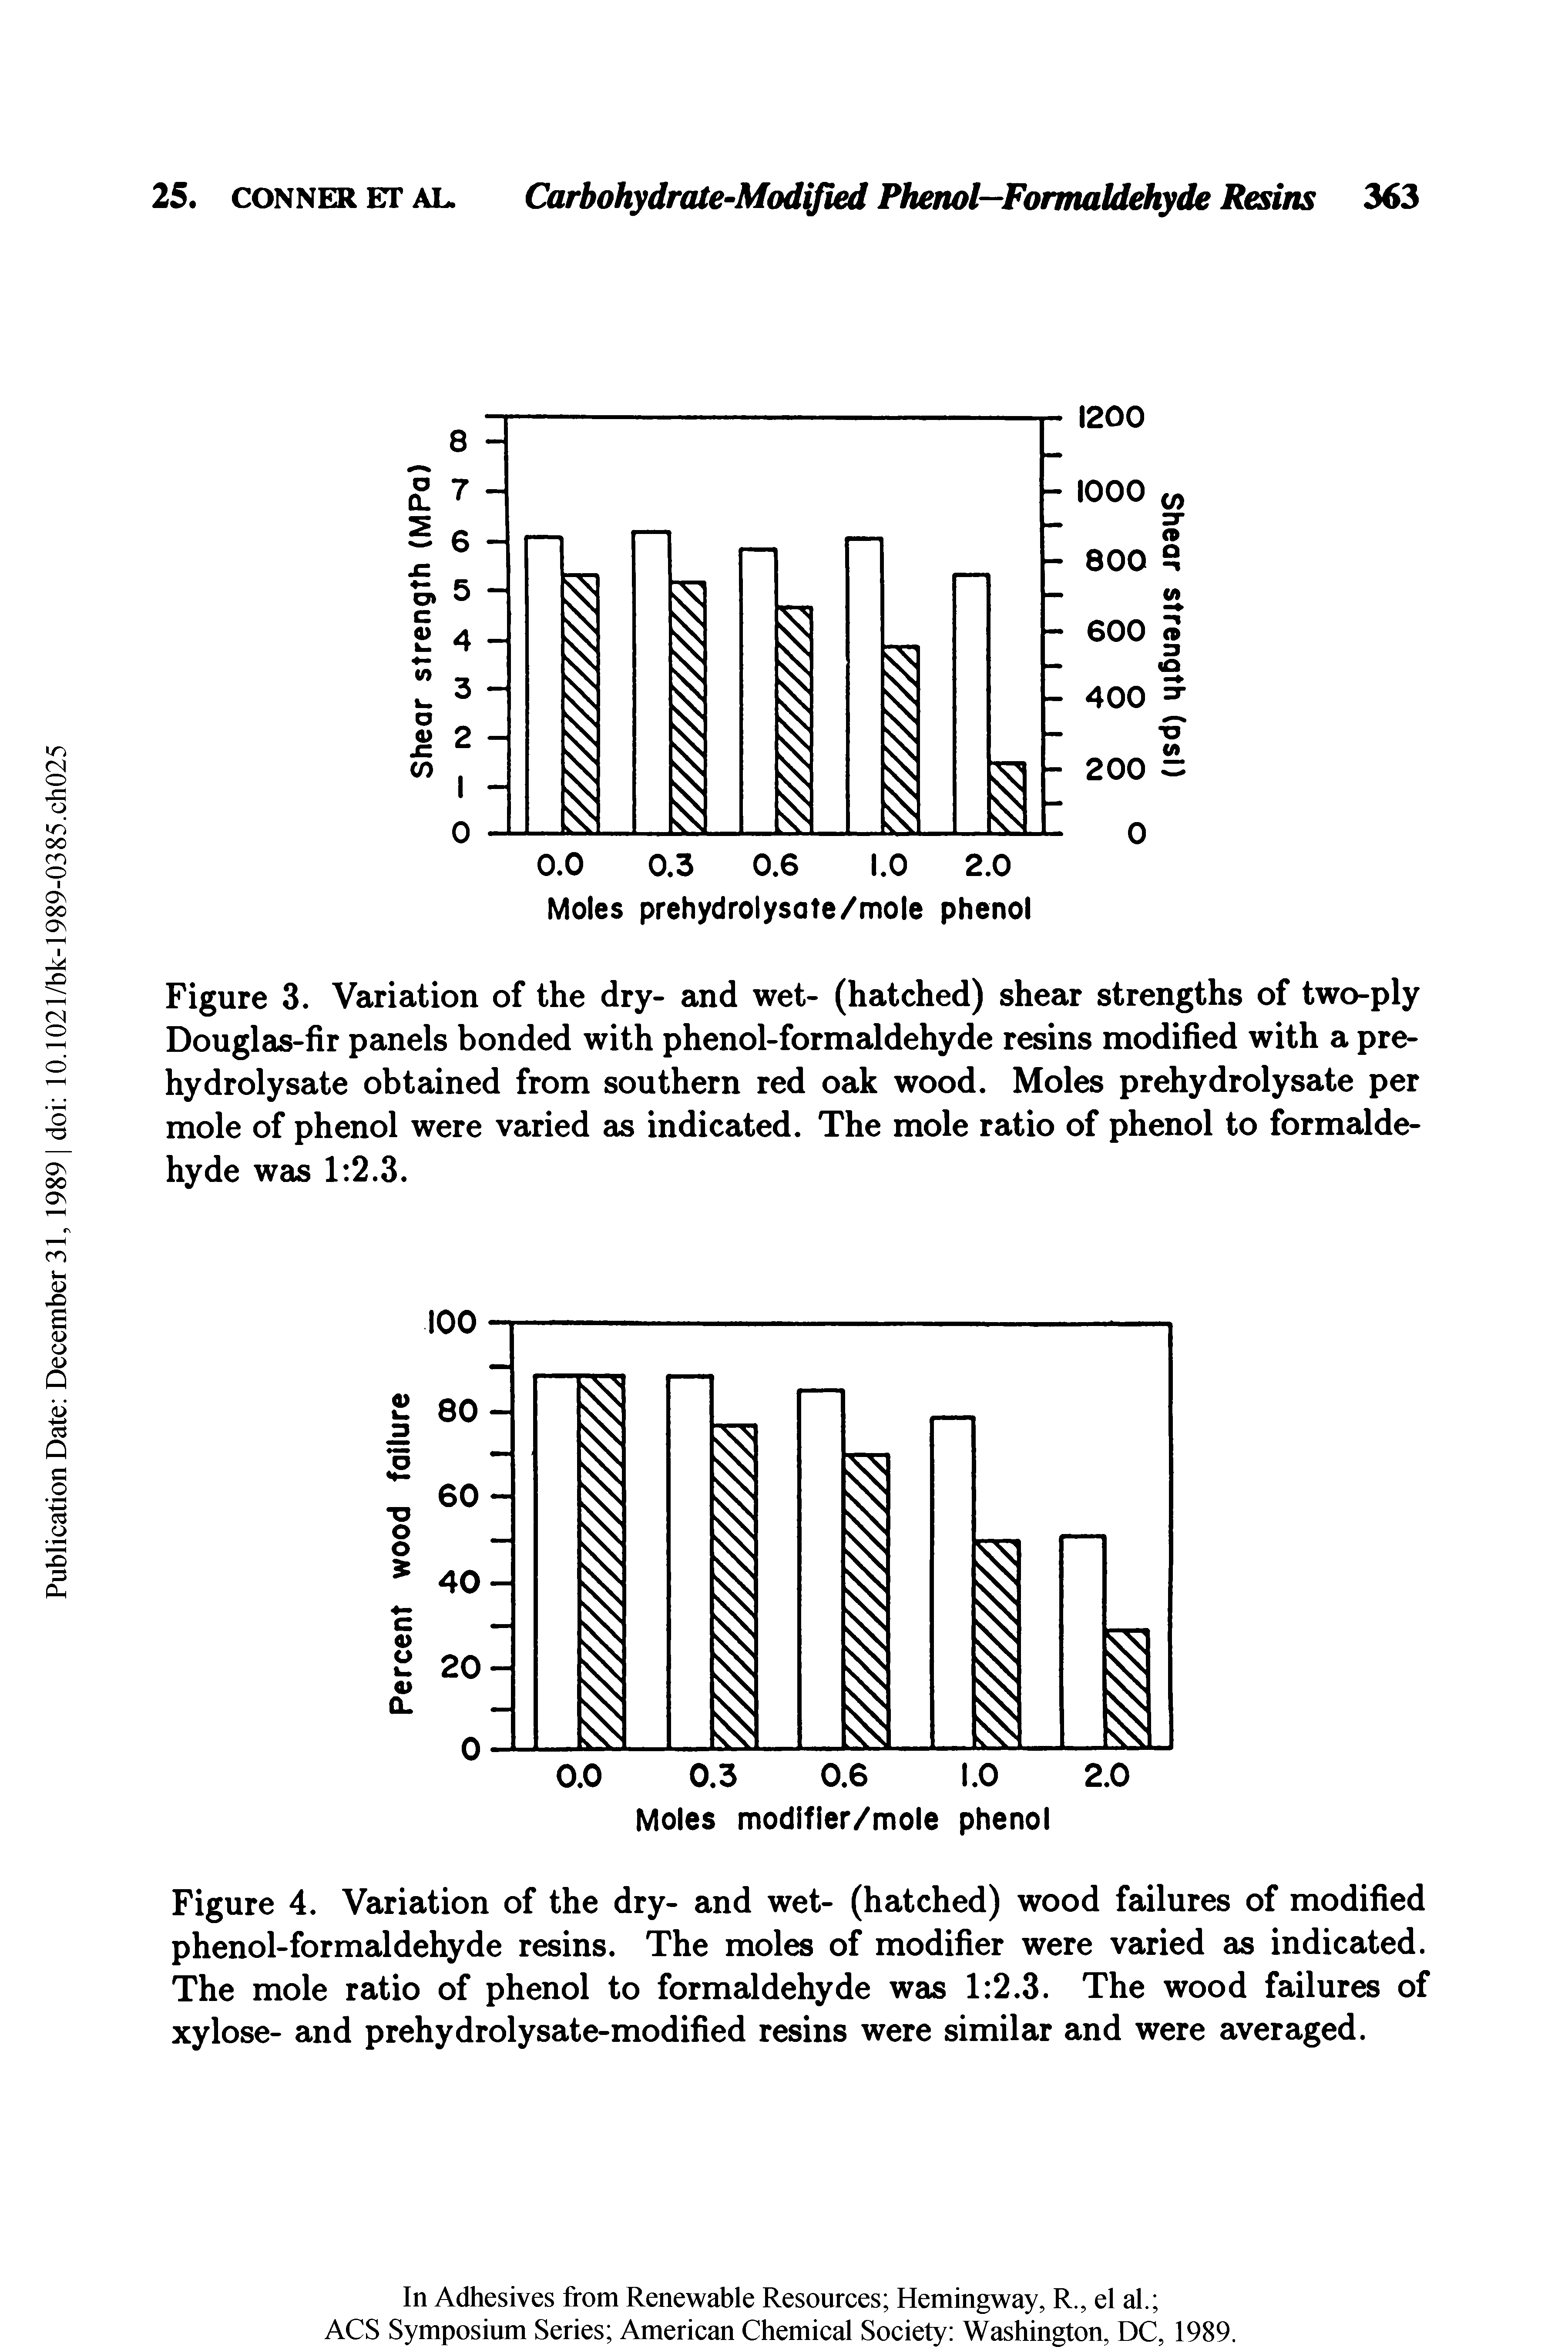 Figure 4. Variation of the dry- and wet- (hatched) wood failures of modified phenol-formaldehyde resins. The moles of modifier were varied as indicated. The mole ratio of phenol to formaldehyde was 1 2.3. The wood failures of xylose- and prehydrolysate-modified resins were similar and were averaged.